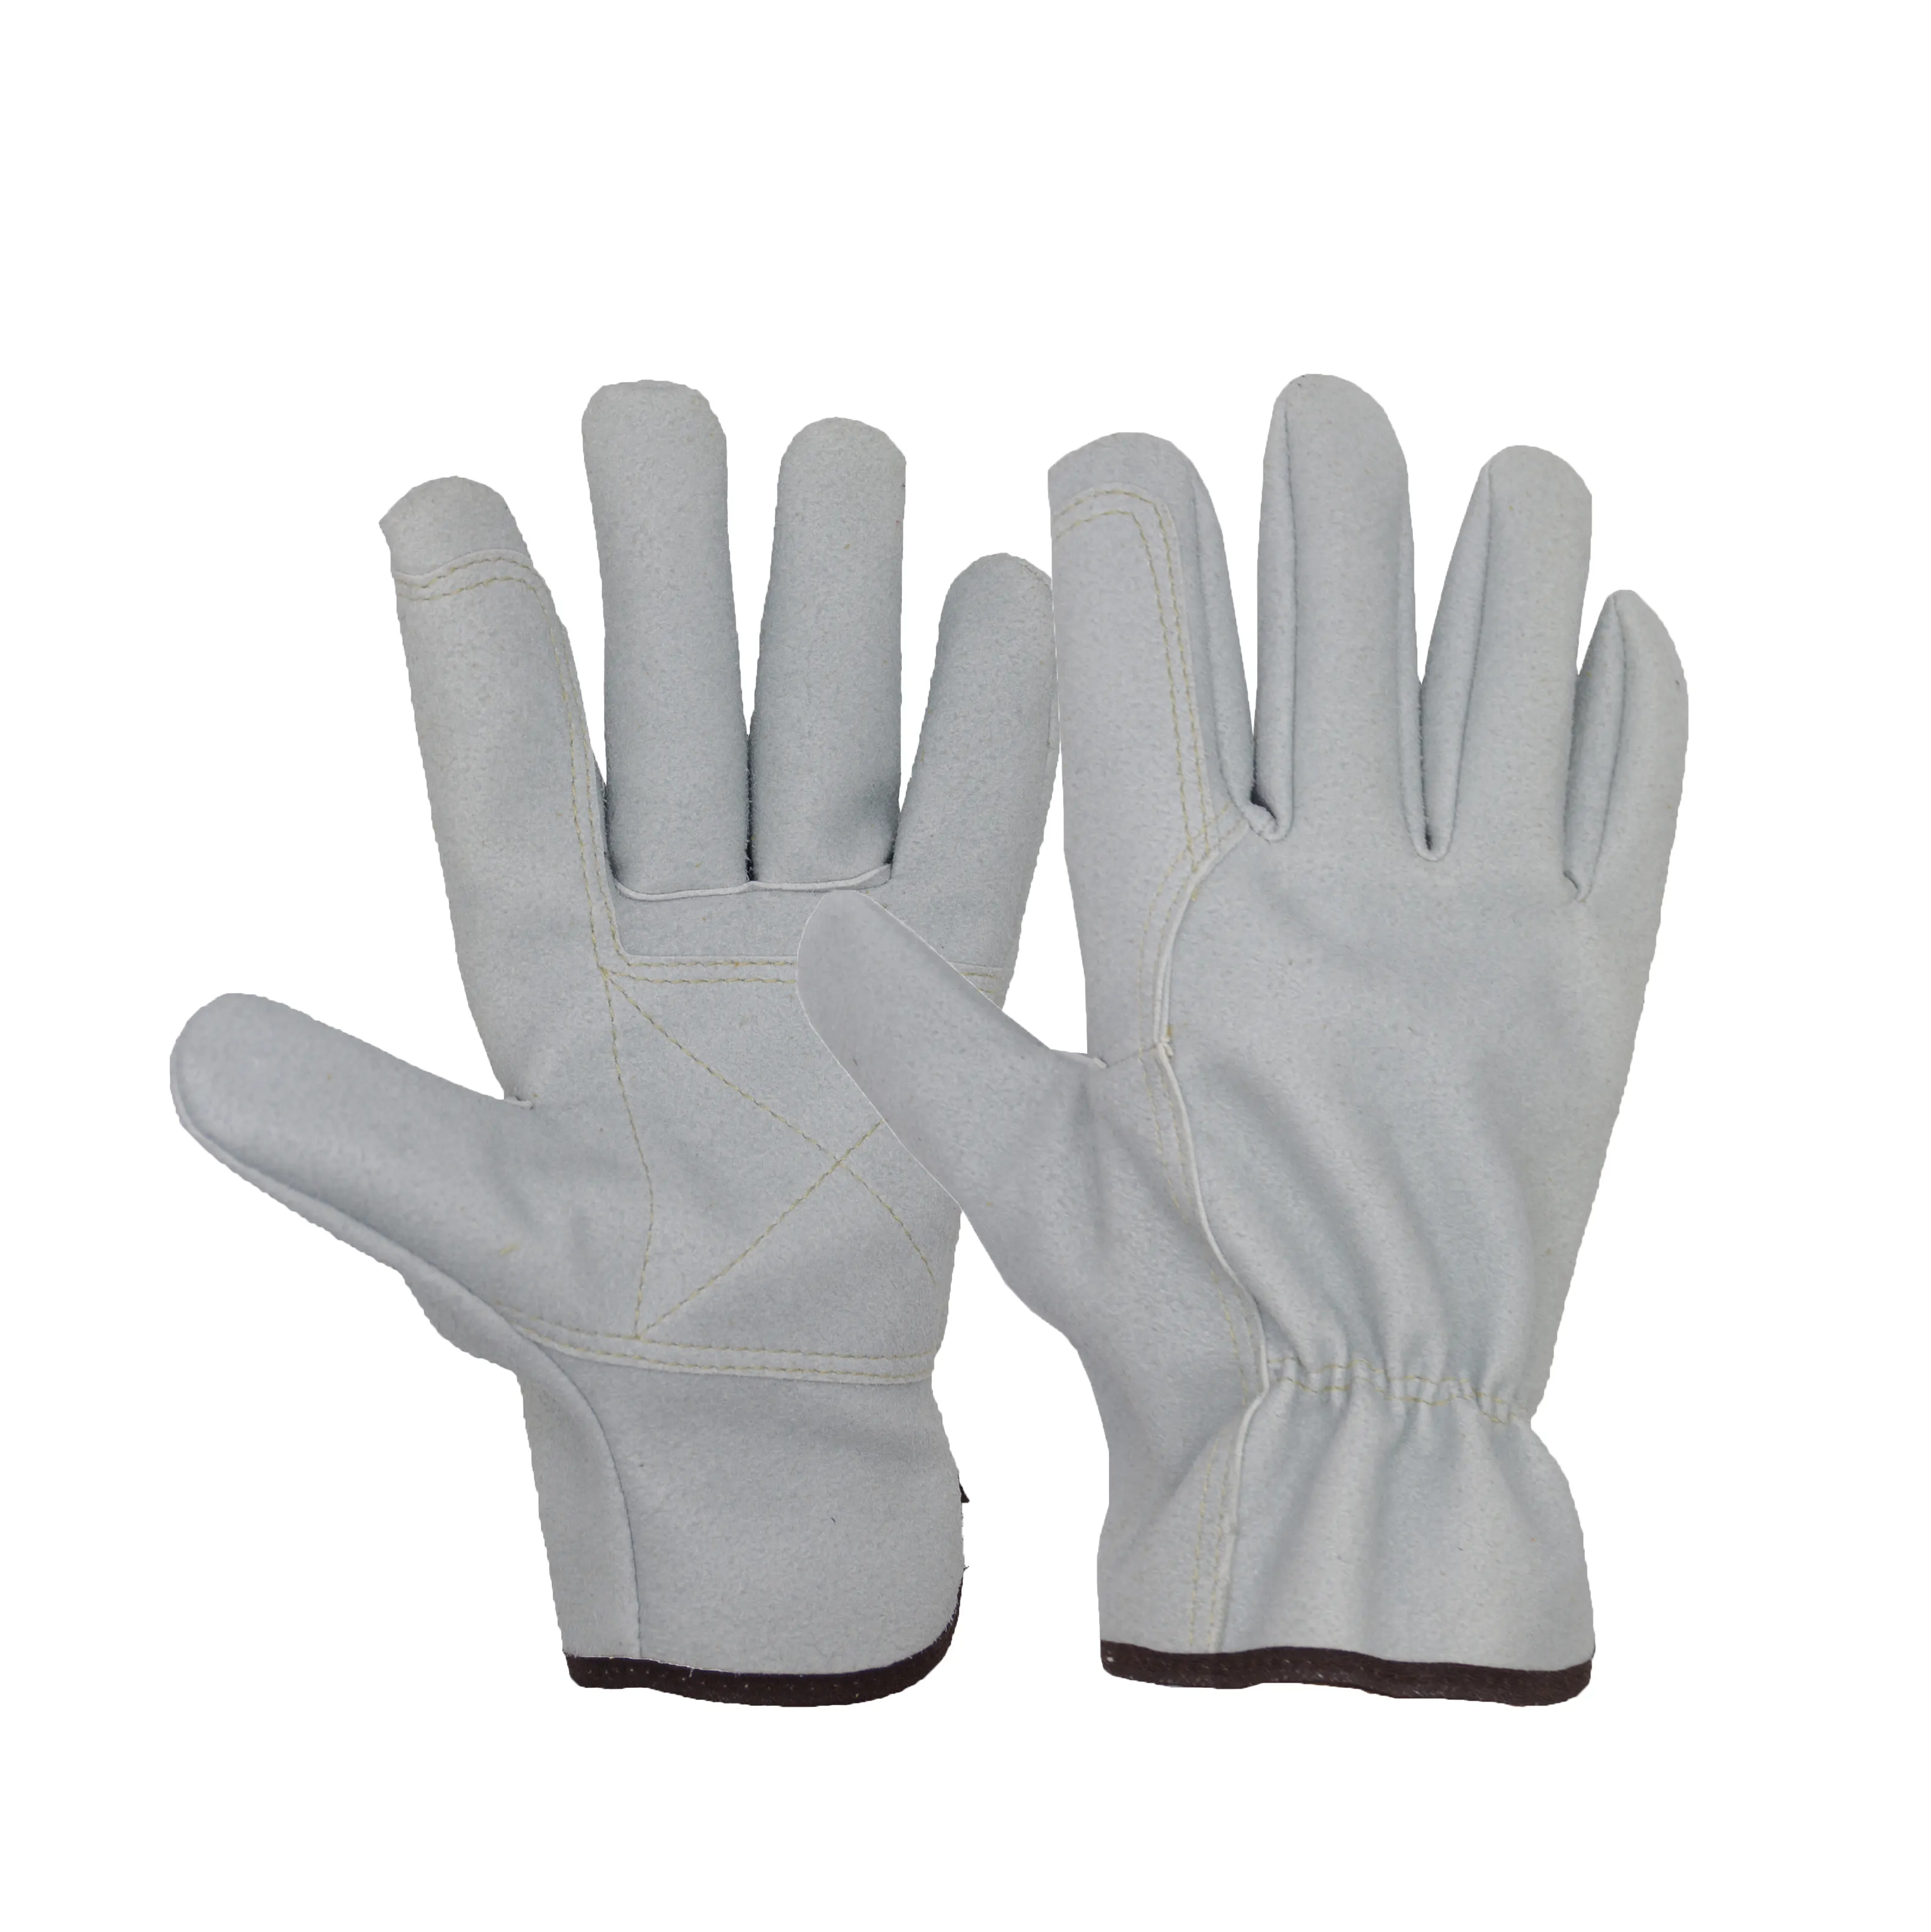 PRI cheap custom logo industrial safety work out gloves work gloves for driver